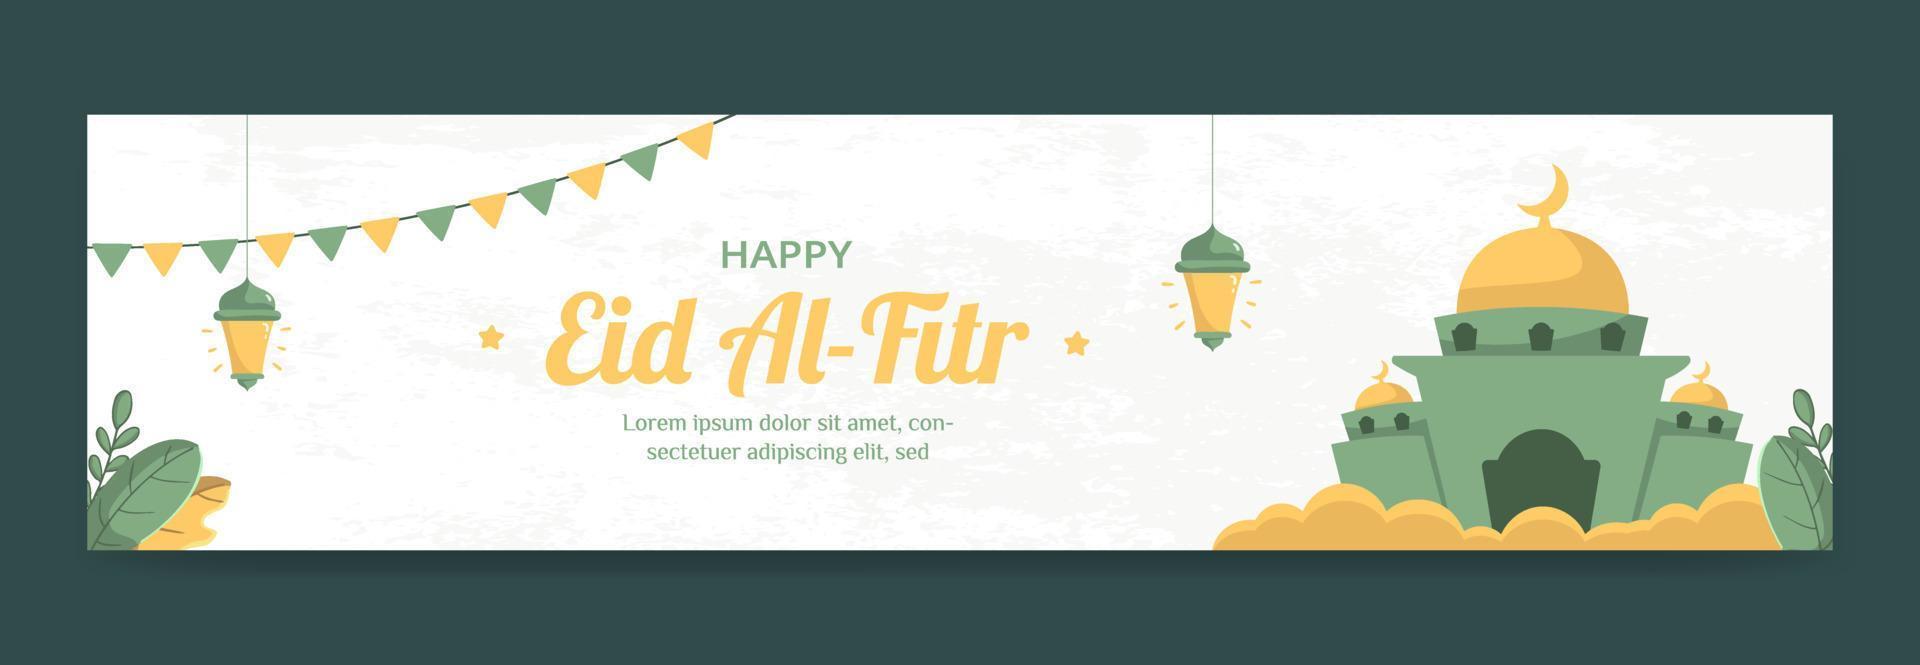 Eid  Mubarak Banner Template  With Mosque and Lantern Concept. Hand Drawn And Flat Style vector